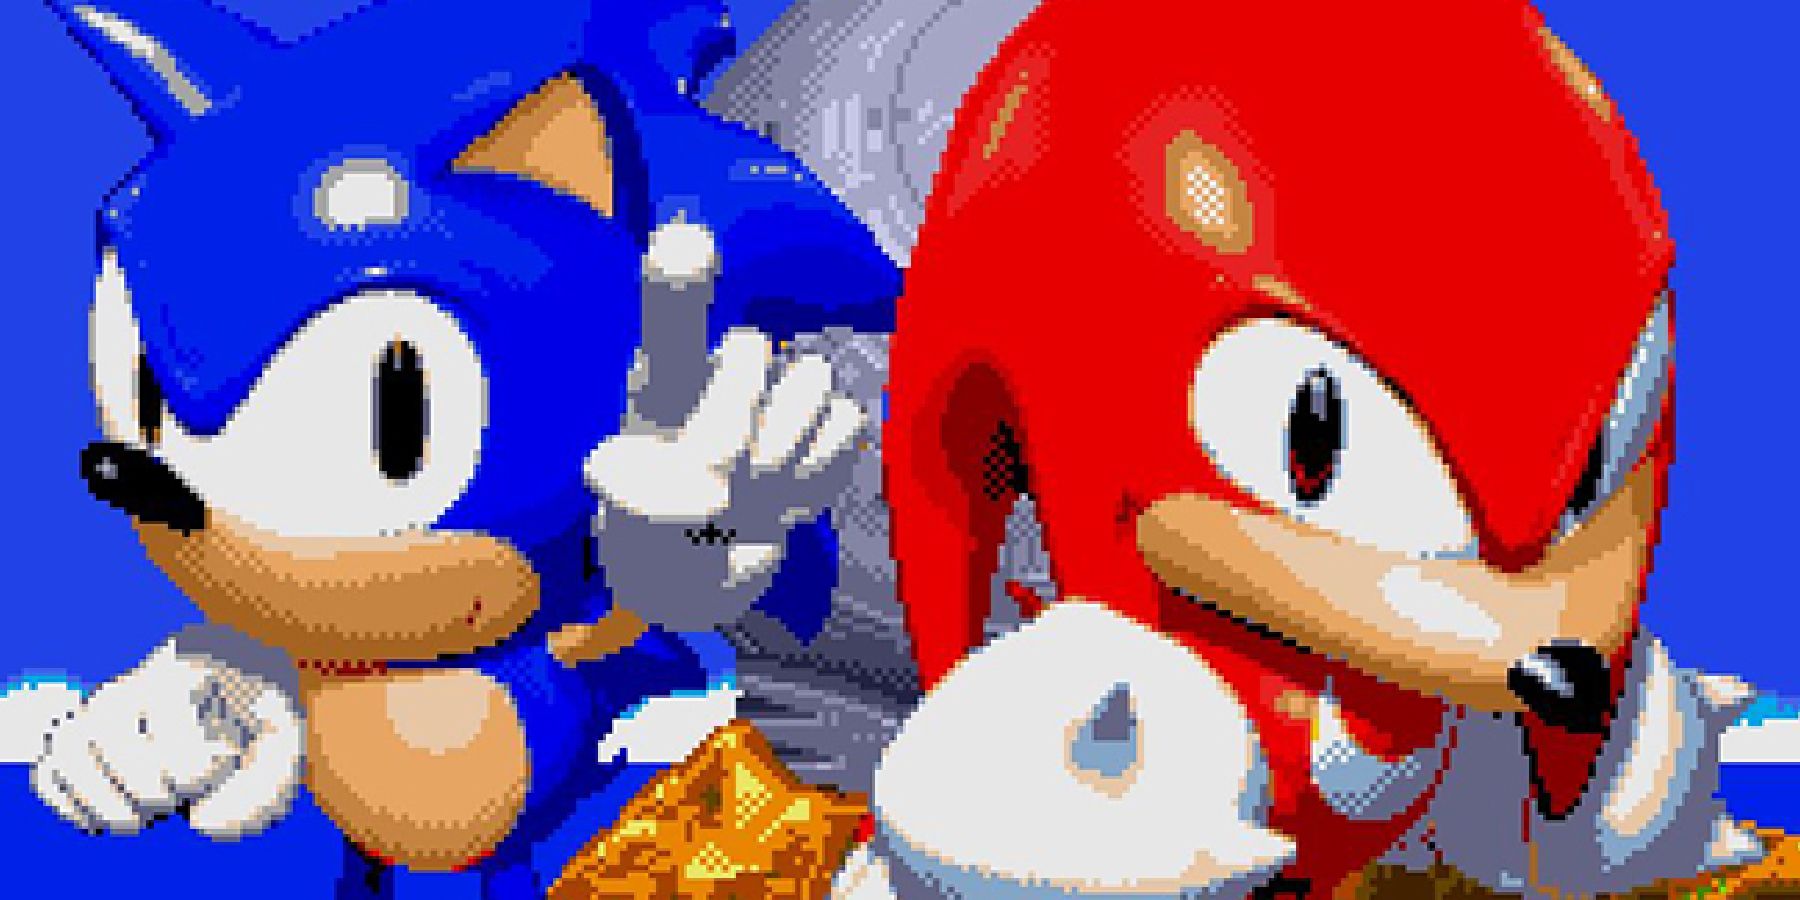 sonic-and-knuckles-start-screen